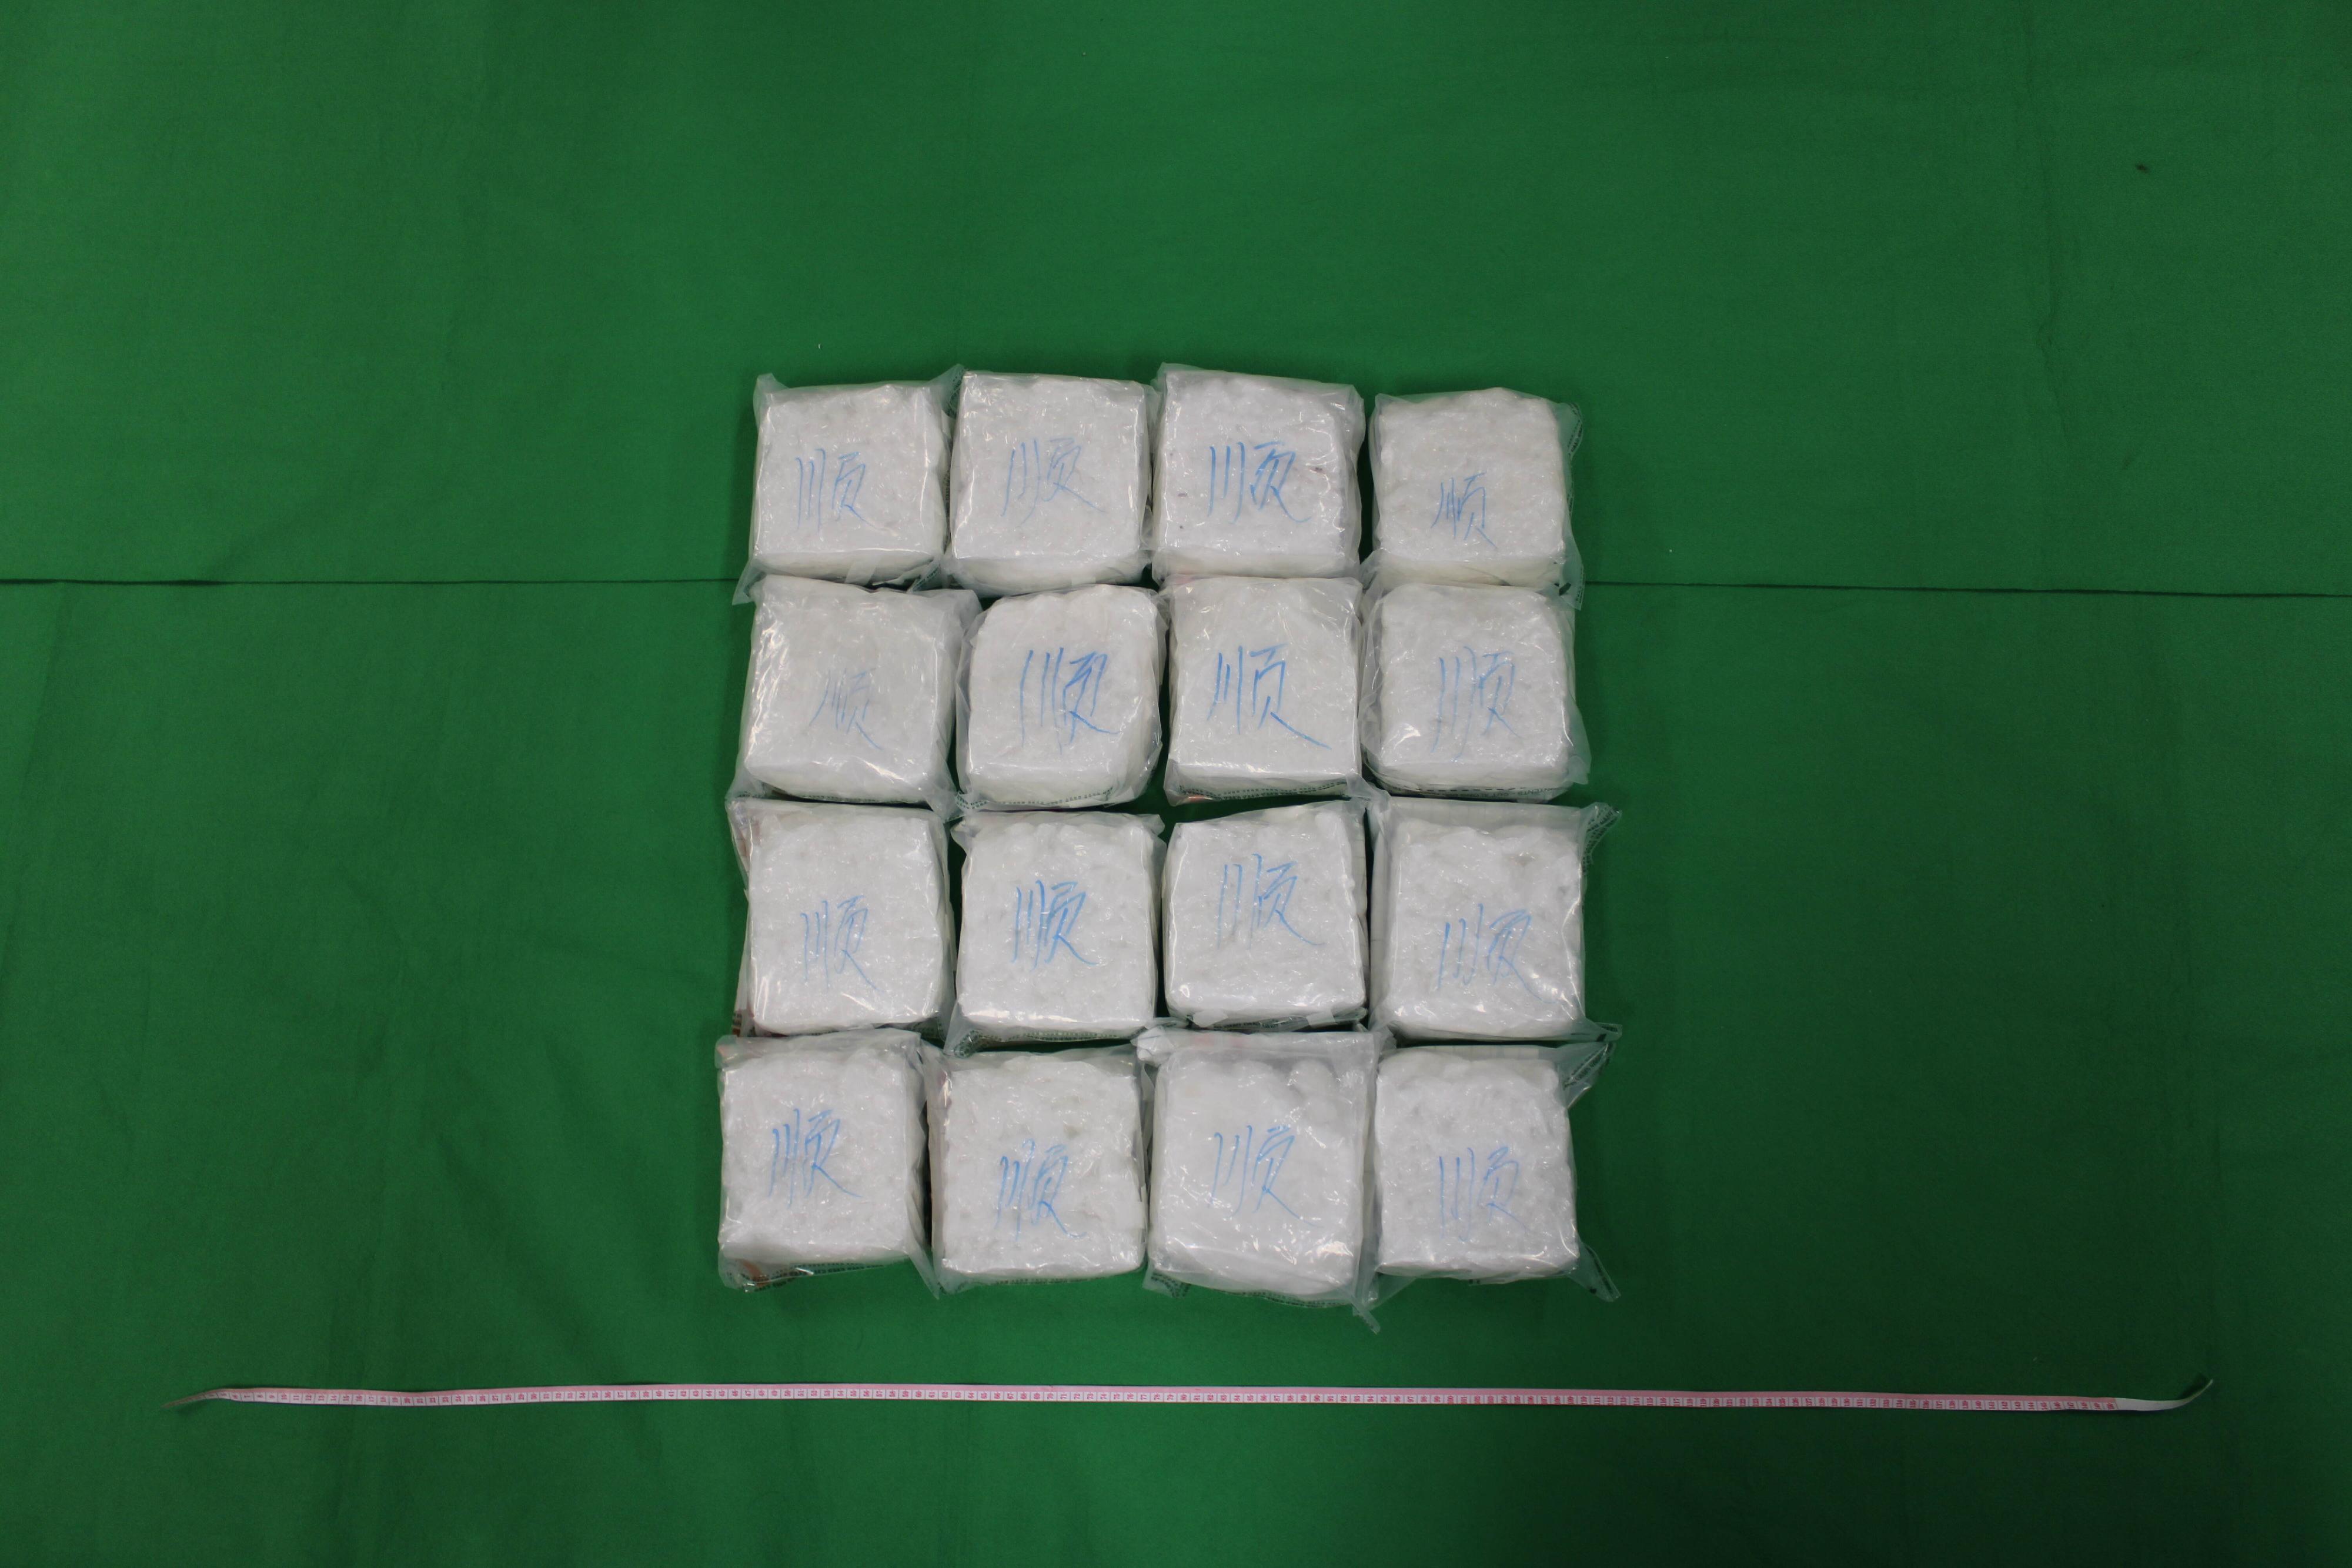 Hong Kong Customs yesterday (July 26) seized about 17 kilograms of suspected methamphetamine in Tai Po with a total estimated market value of about $7.8 million. Photo shows the suspected methamphetamine seized.